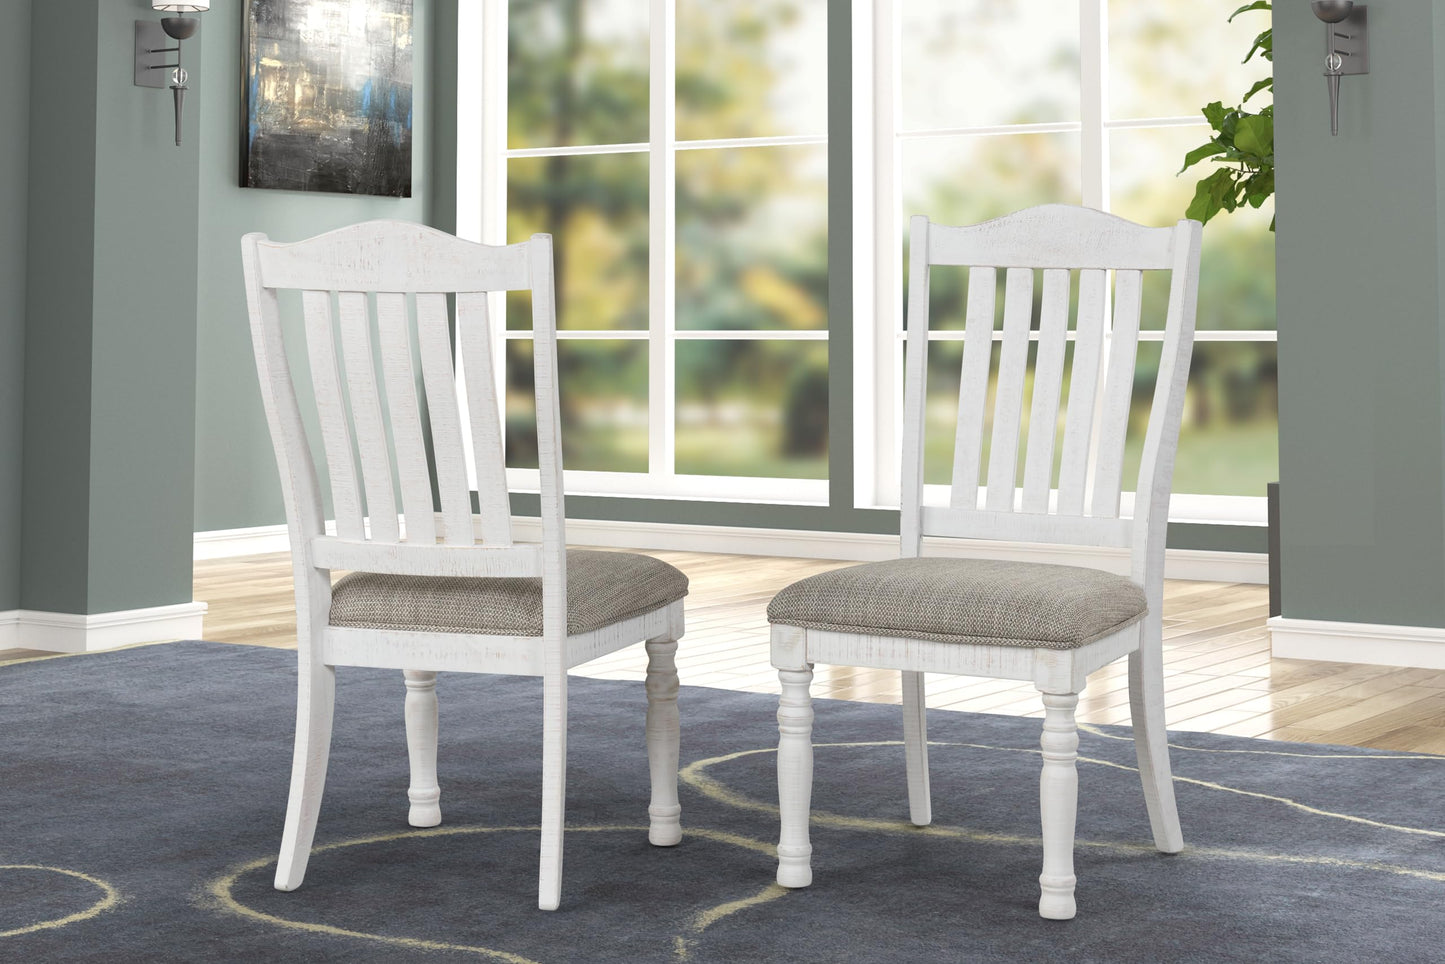 Roundhill Furniture Ebret Two-Tone Distressed Wood Dining Chairs, Set of 2, Brown and White